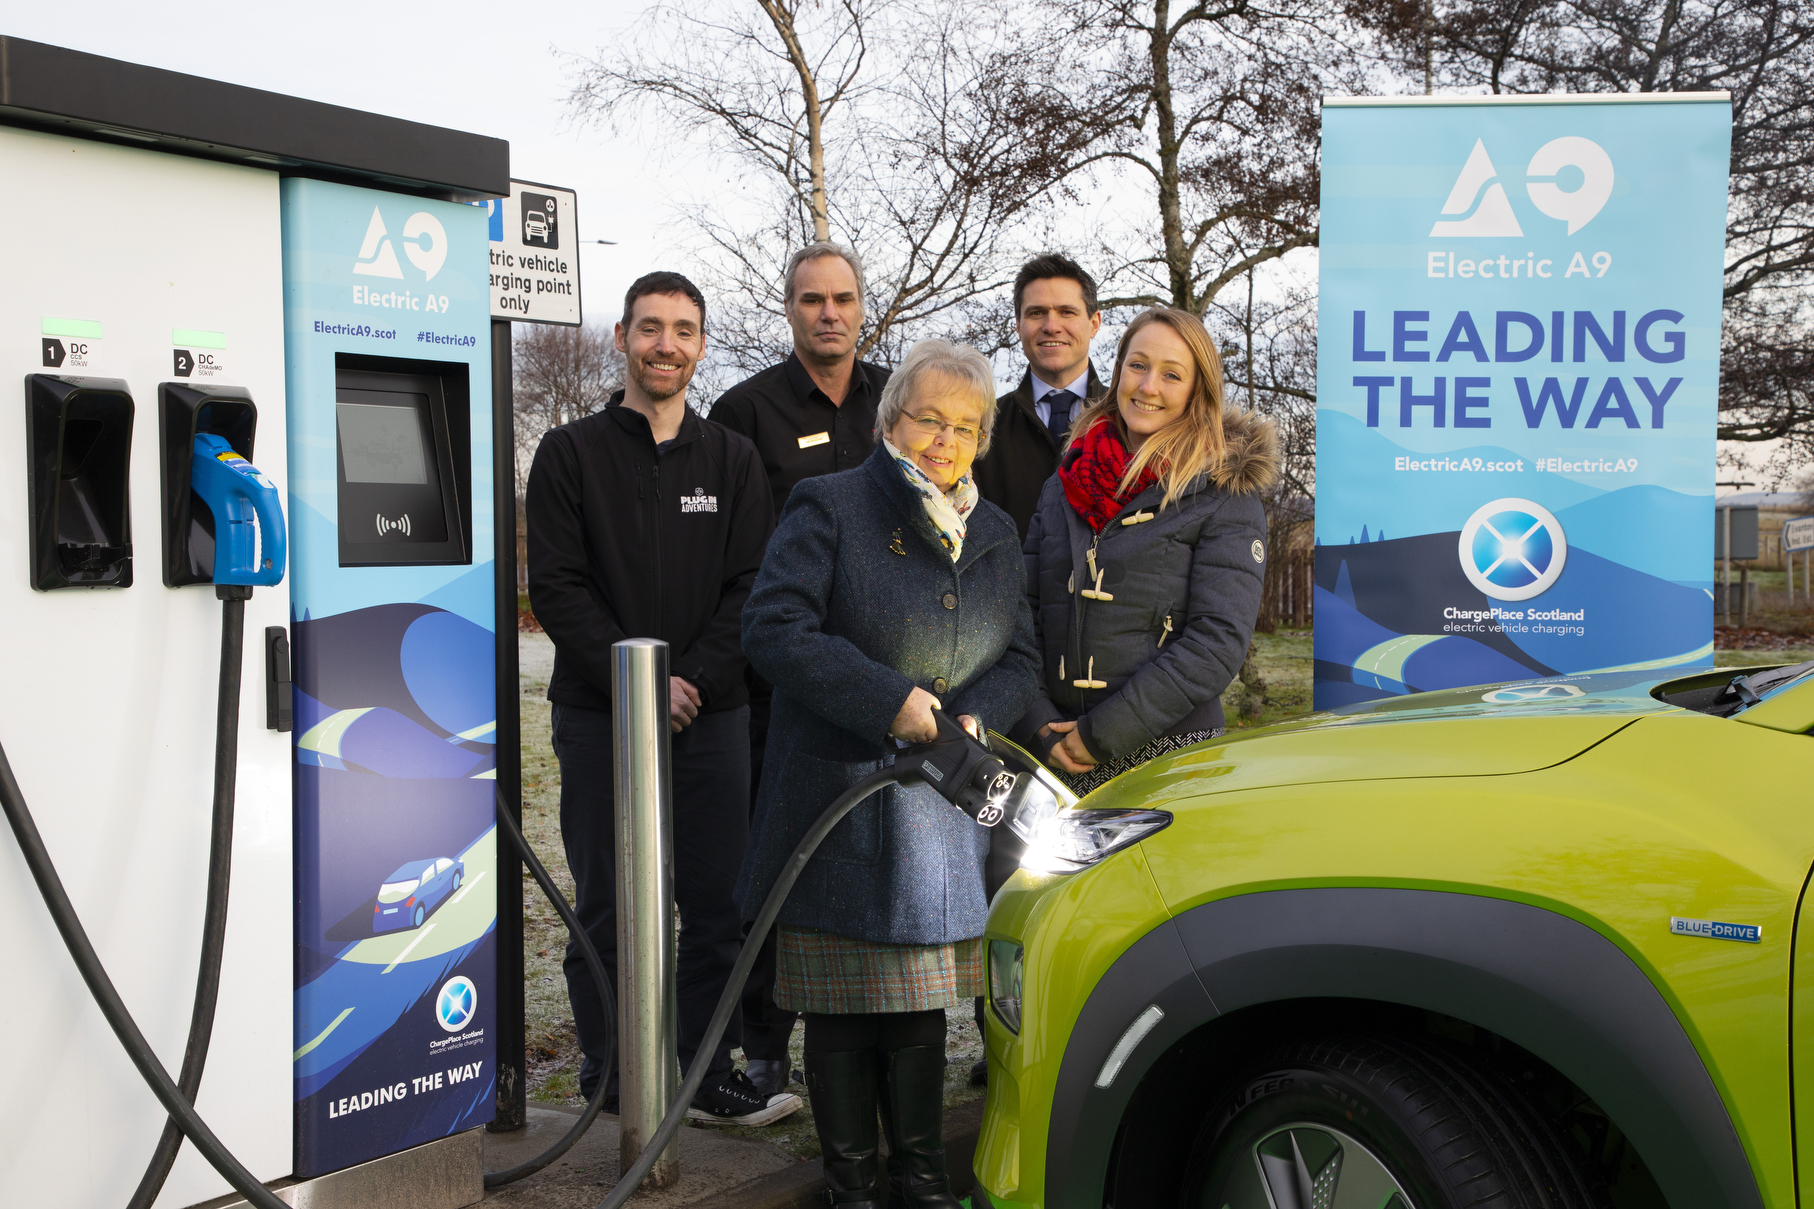 A9 Electric charge point launch